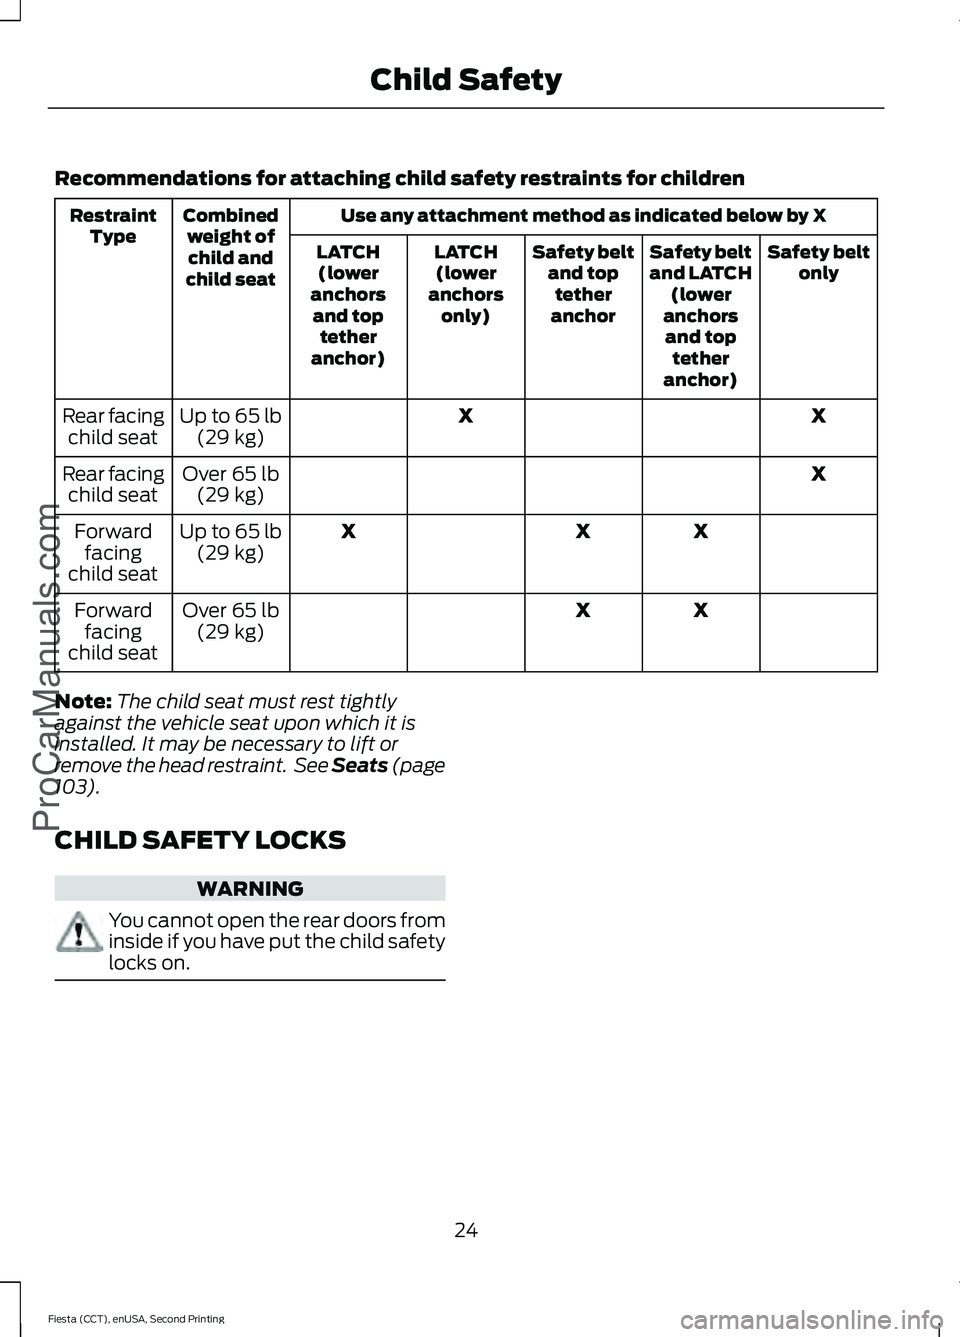 FORD FIESTA 2015  Owners Manual Recommendations for attaching child safety restraints for children
Use any attachment method as indicated below by X
Combined
weight ofchild and
child seat
Restraint
Type Safety belt
only
Safety belt
